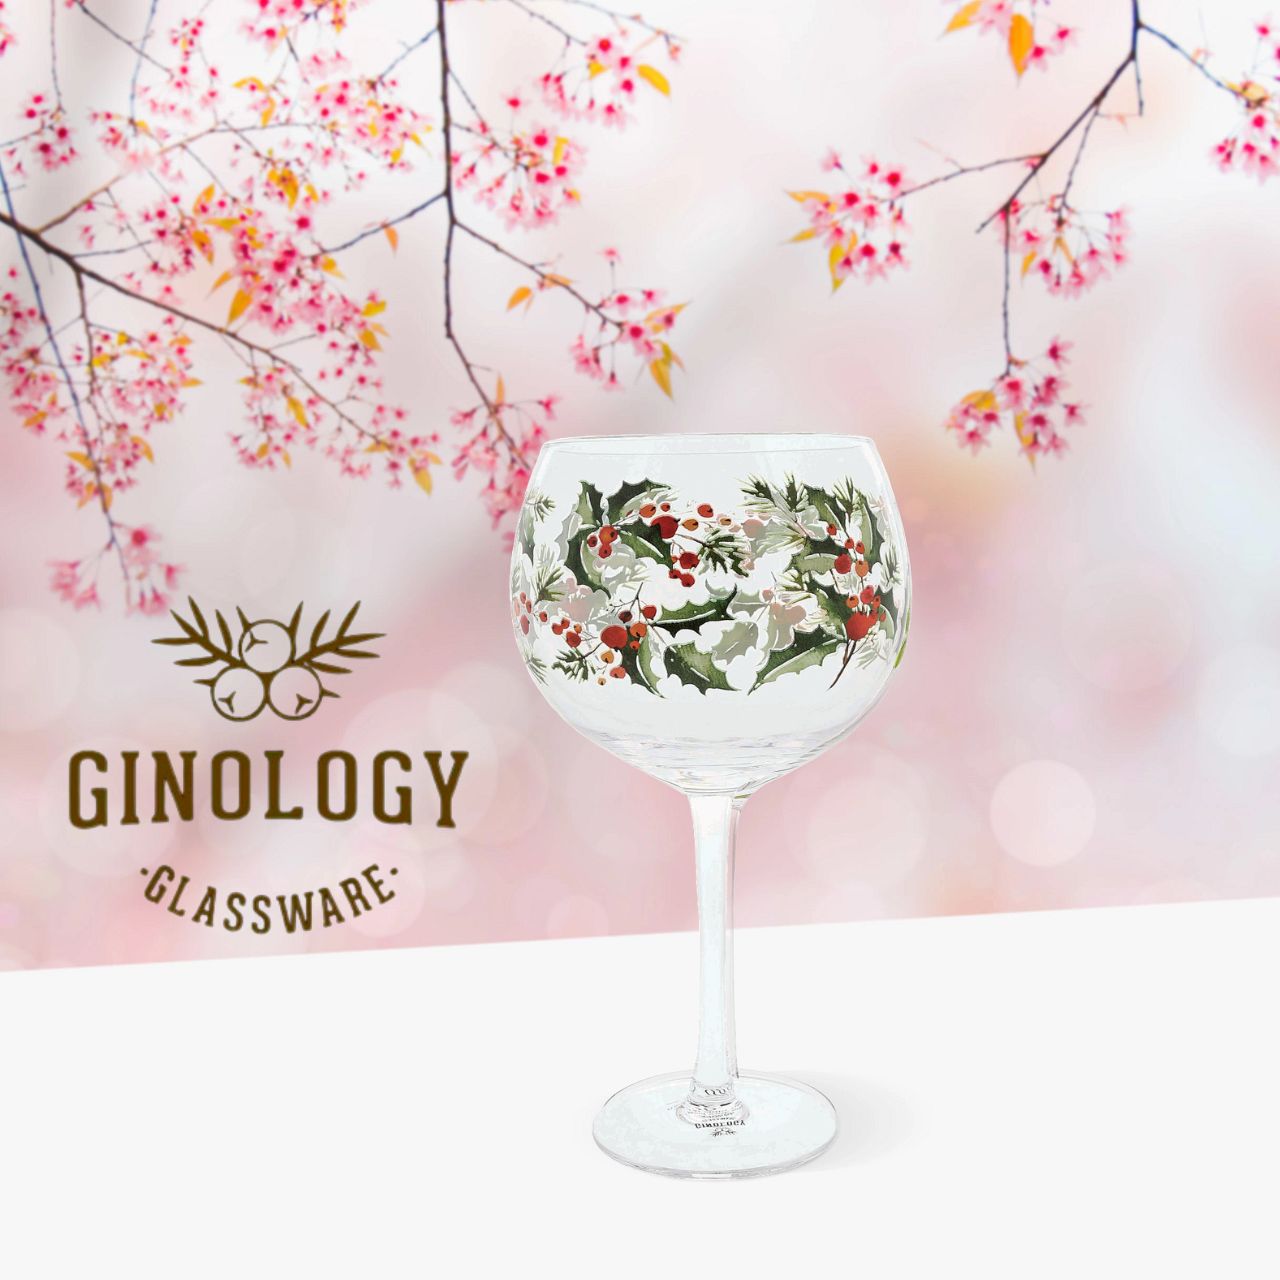 Ginology Christmas Holly Copa Gin Glass  Deck your Christmas Gin glass this holiday with our Holly Copa Gin glass. Looking for the ultimate gift or a self purchase? Why not team this up with your favourite drink for a luxury gift for your friend, grandmother, sister, or mother.